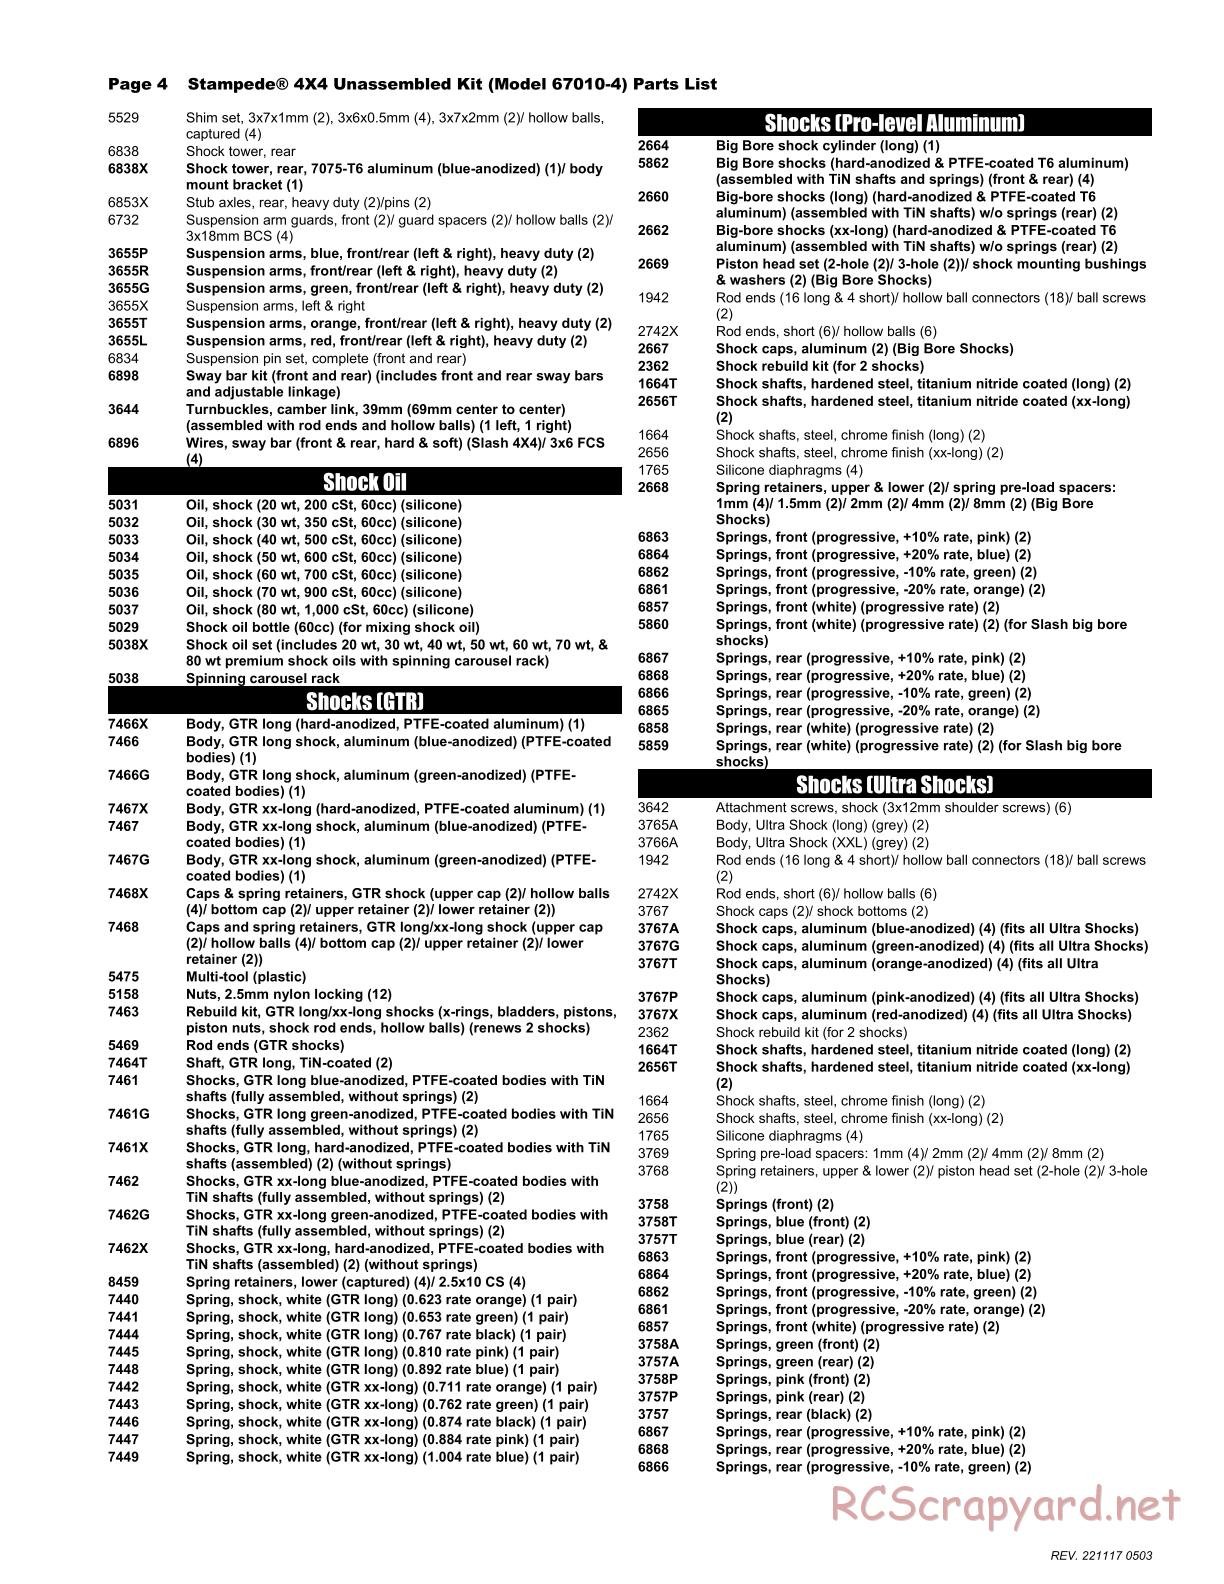 Traxxas - Stampede 4x4 (2019) - Parts List - Page 4